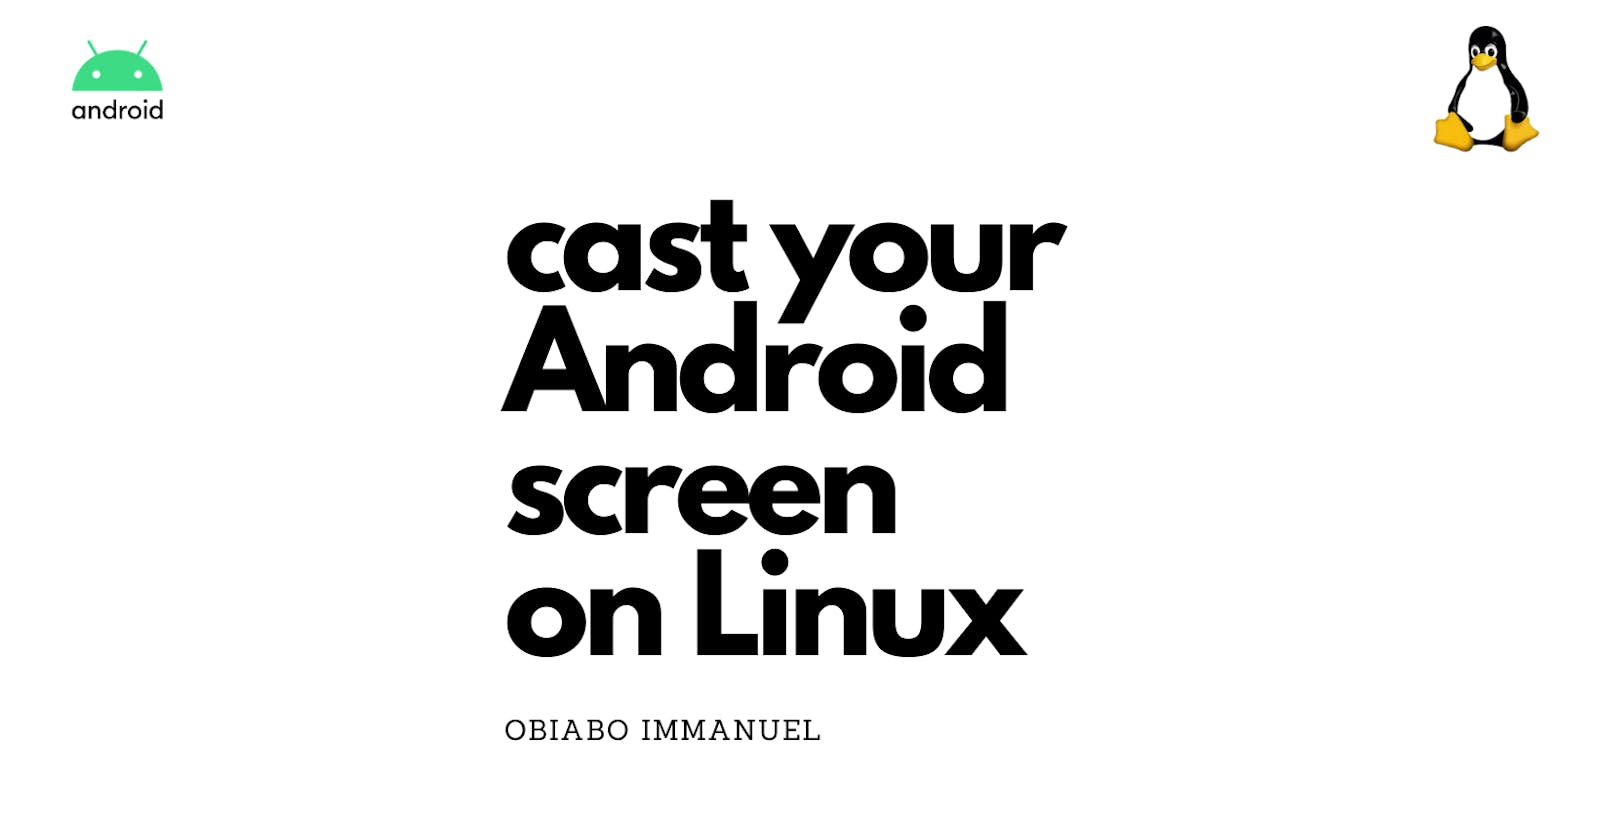 Mirror your android screen on your Linux easily